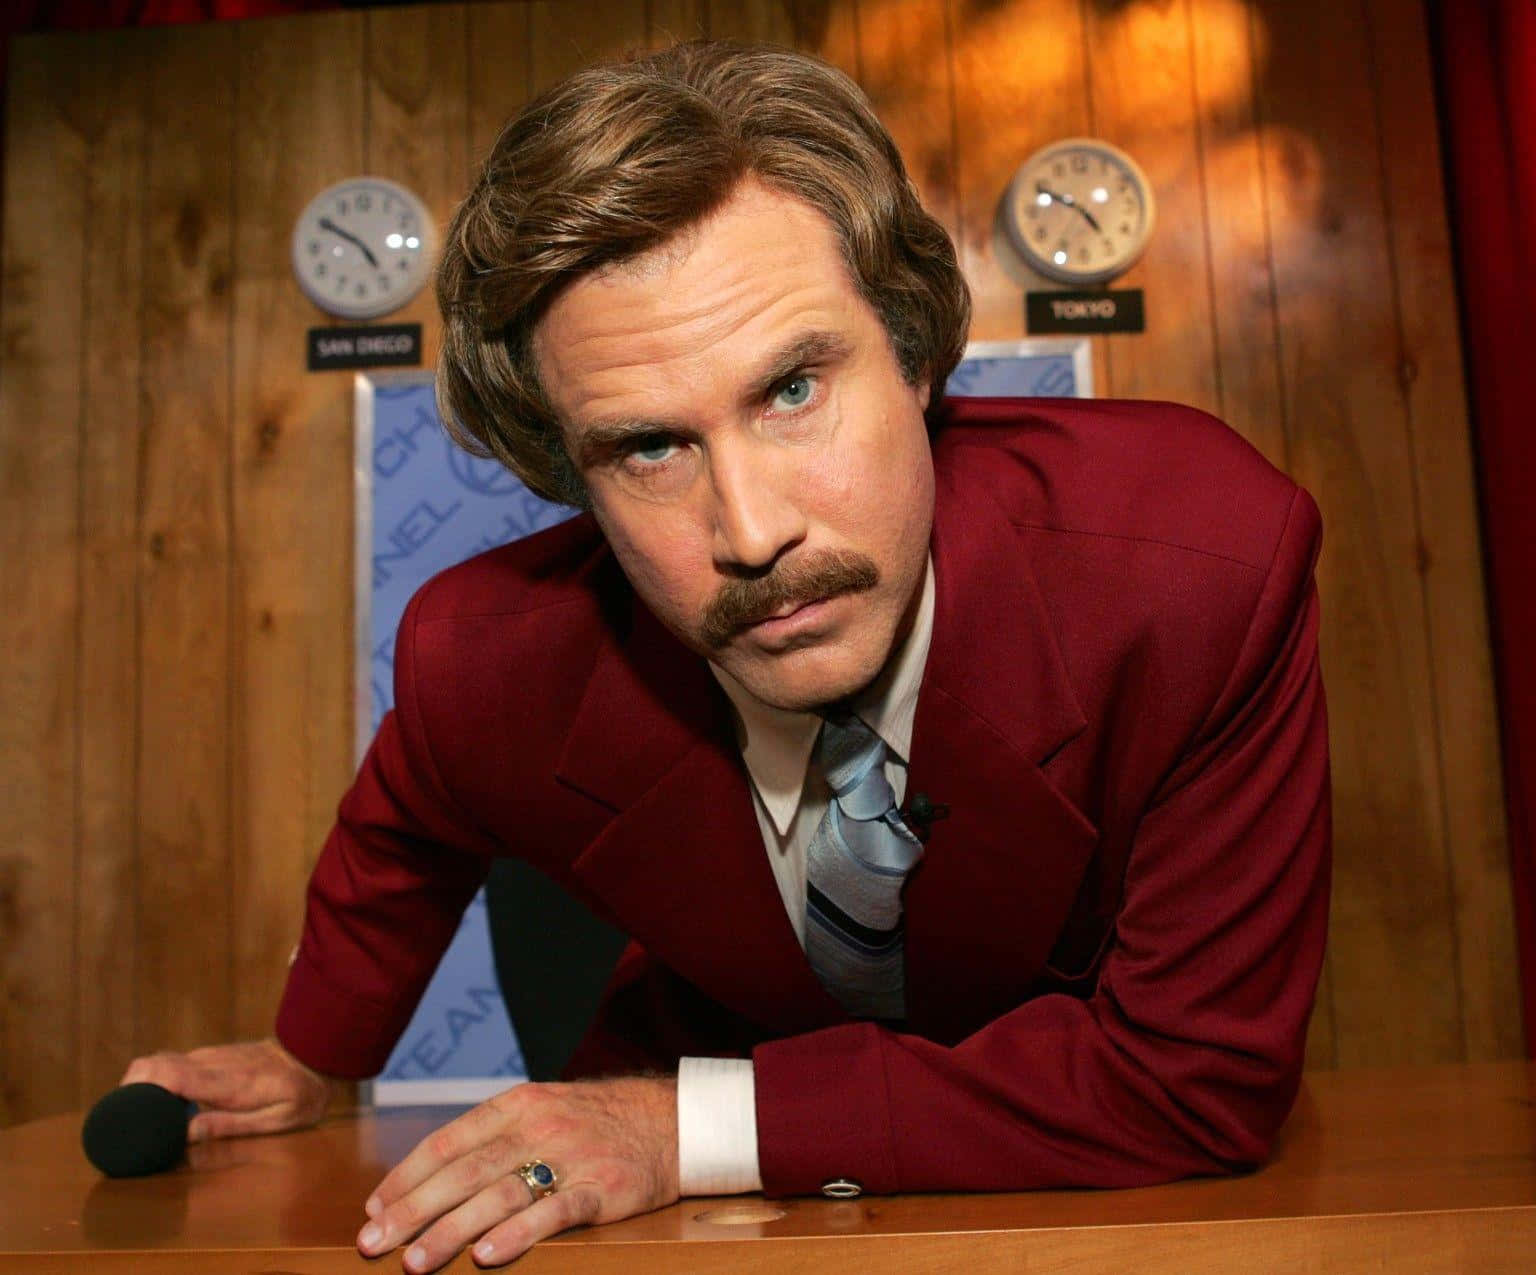 Will Ferrell striking a pose on the red carpet Wallpaper